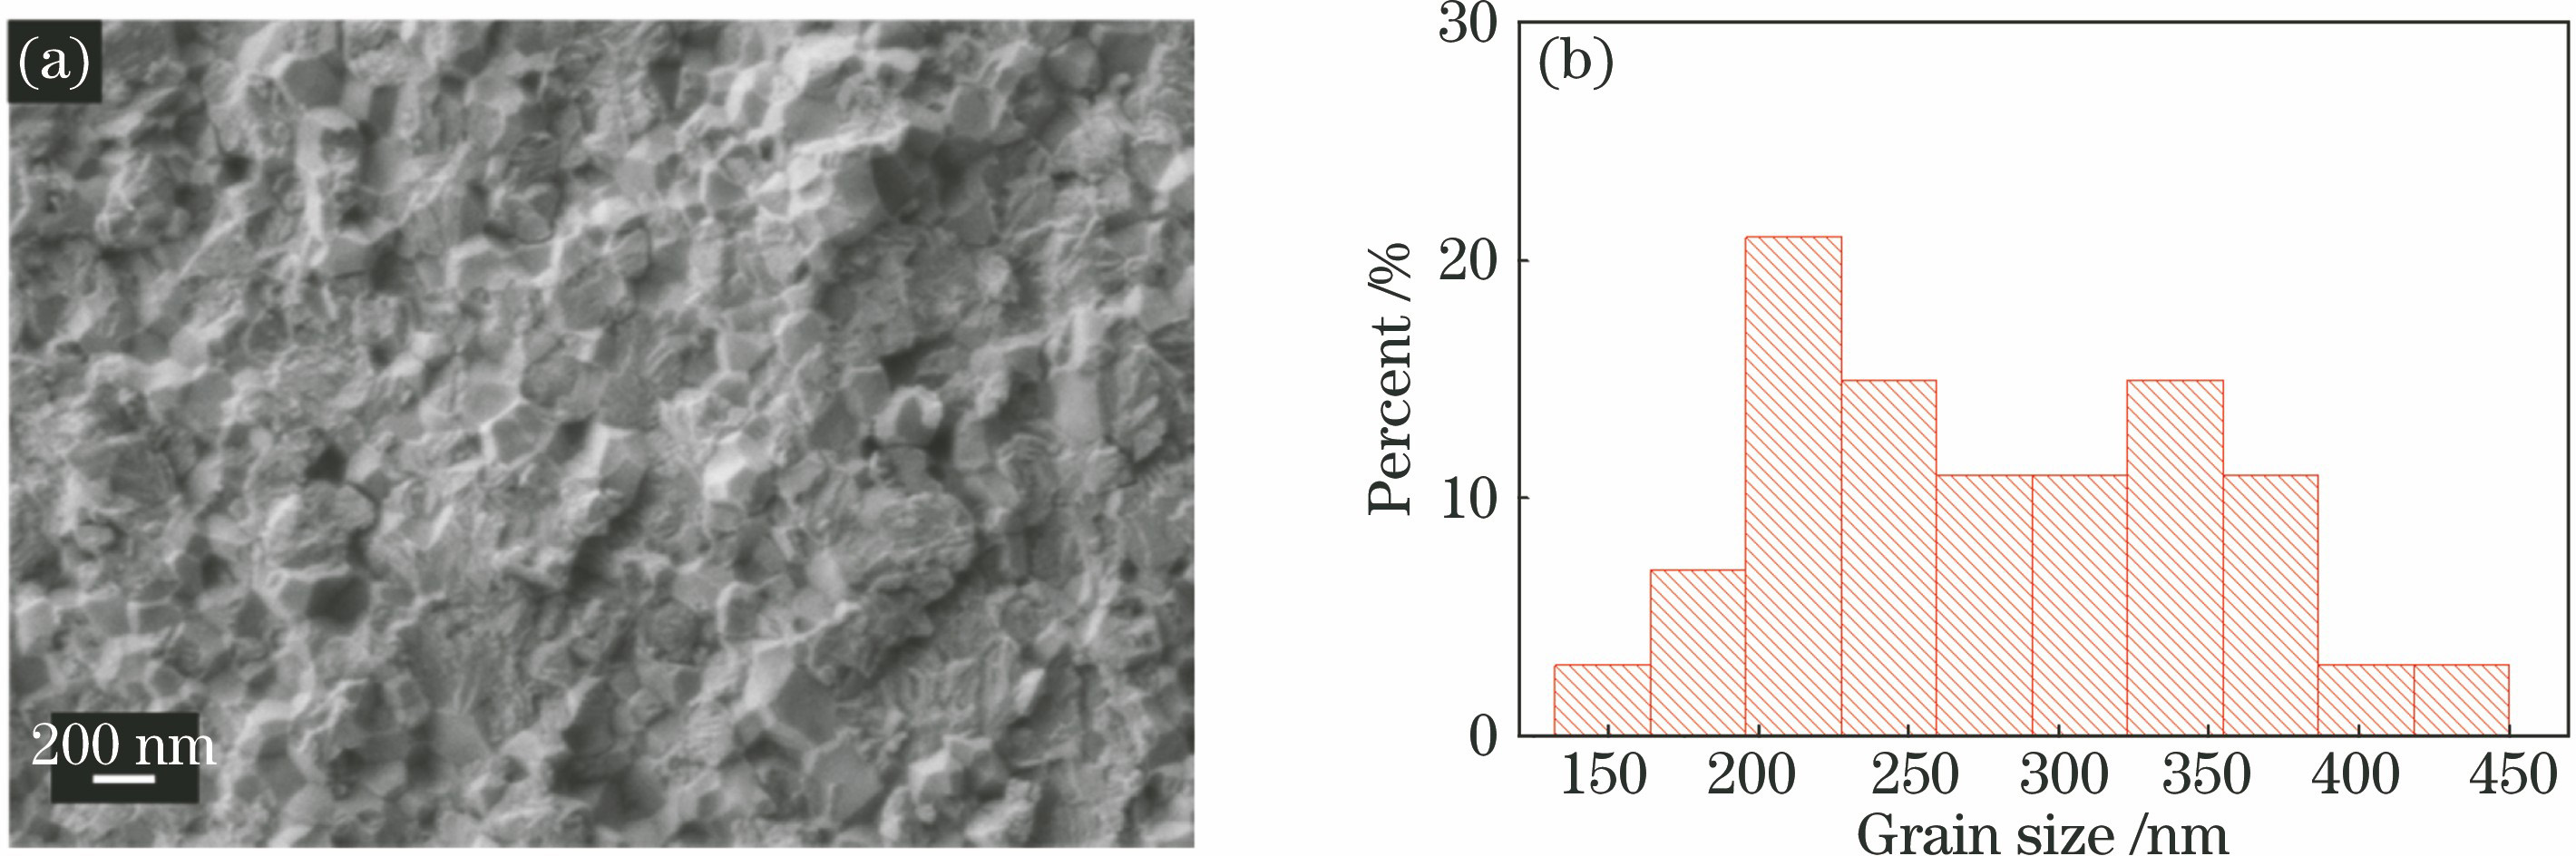 Fractured surface image and grain size distribution of high strength nano infrared ceramic. (a) Fractured surface image of infrared ceramic; (b) grain size distribution